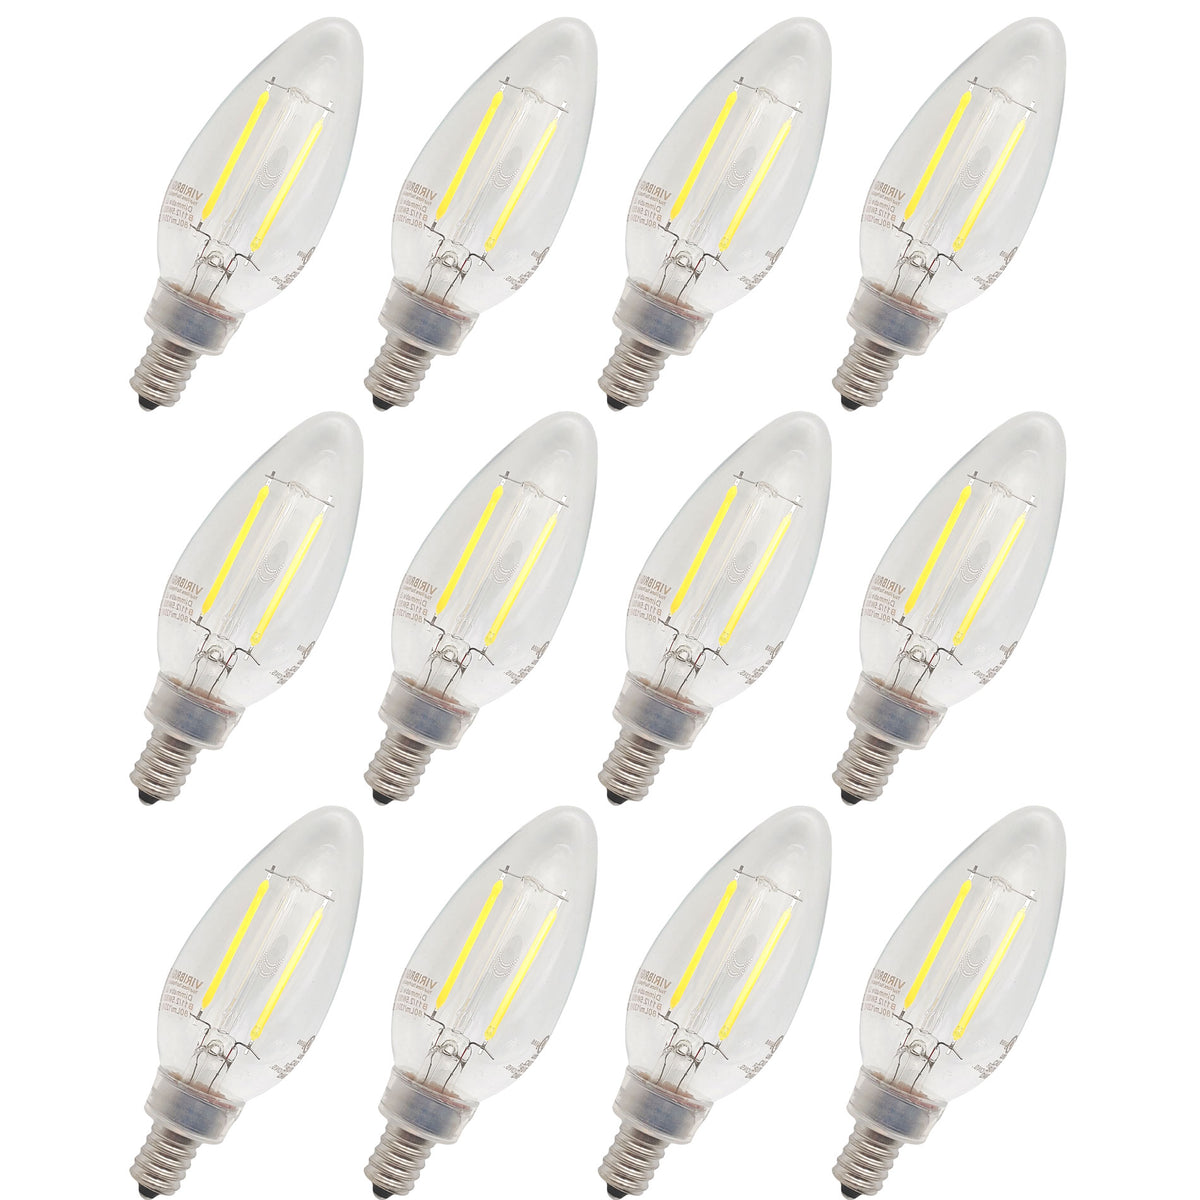 Picture of Viribright 750192-12MC 35W Equivalent B10 Dimmable E12 Candelabra Base LED Light Bulb, Warm White - Pack of 12